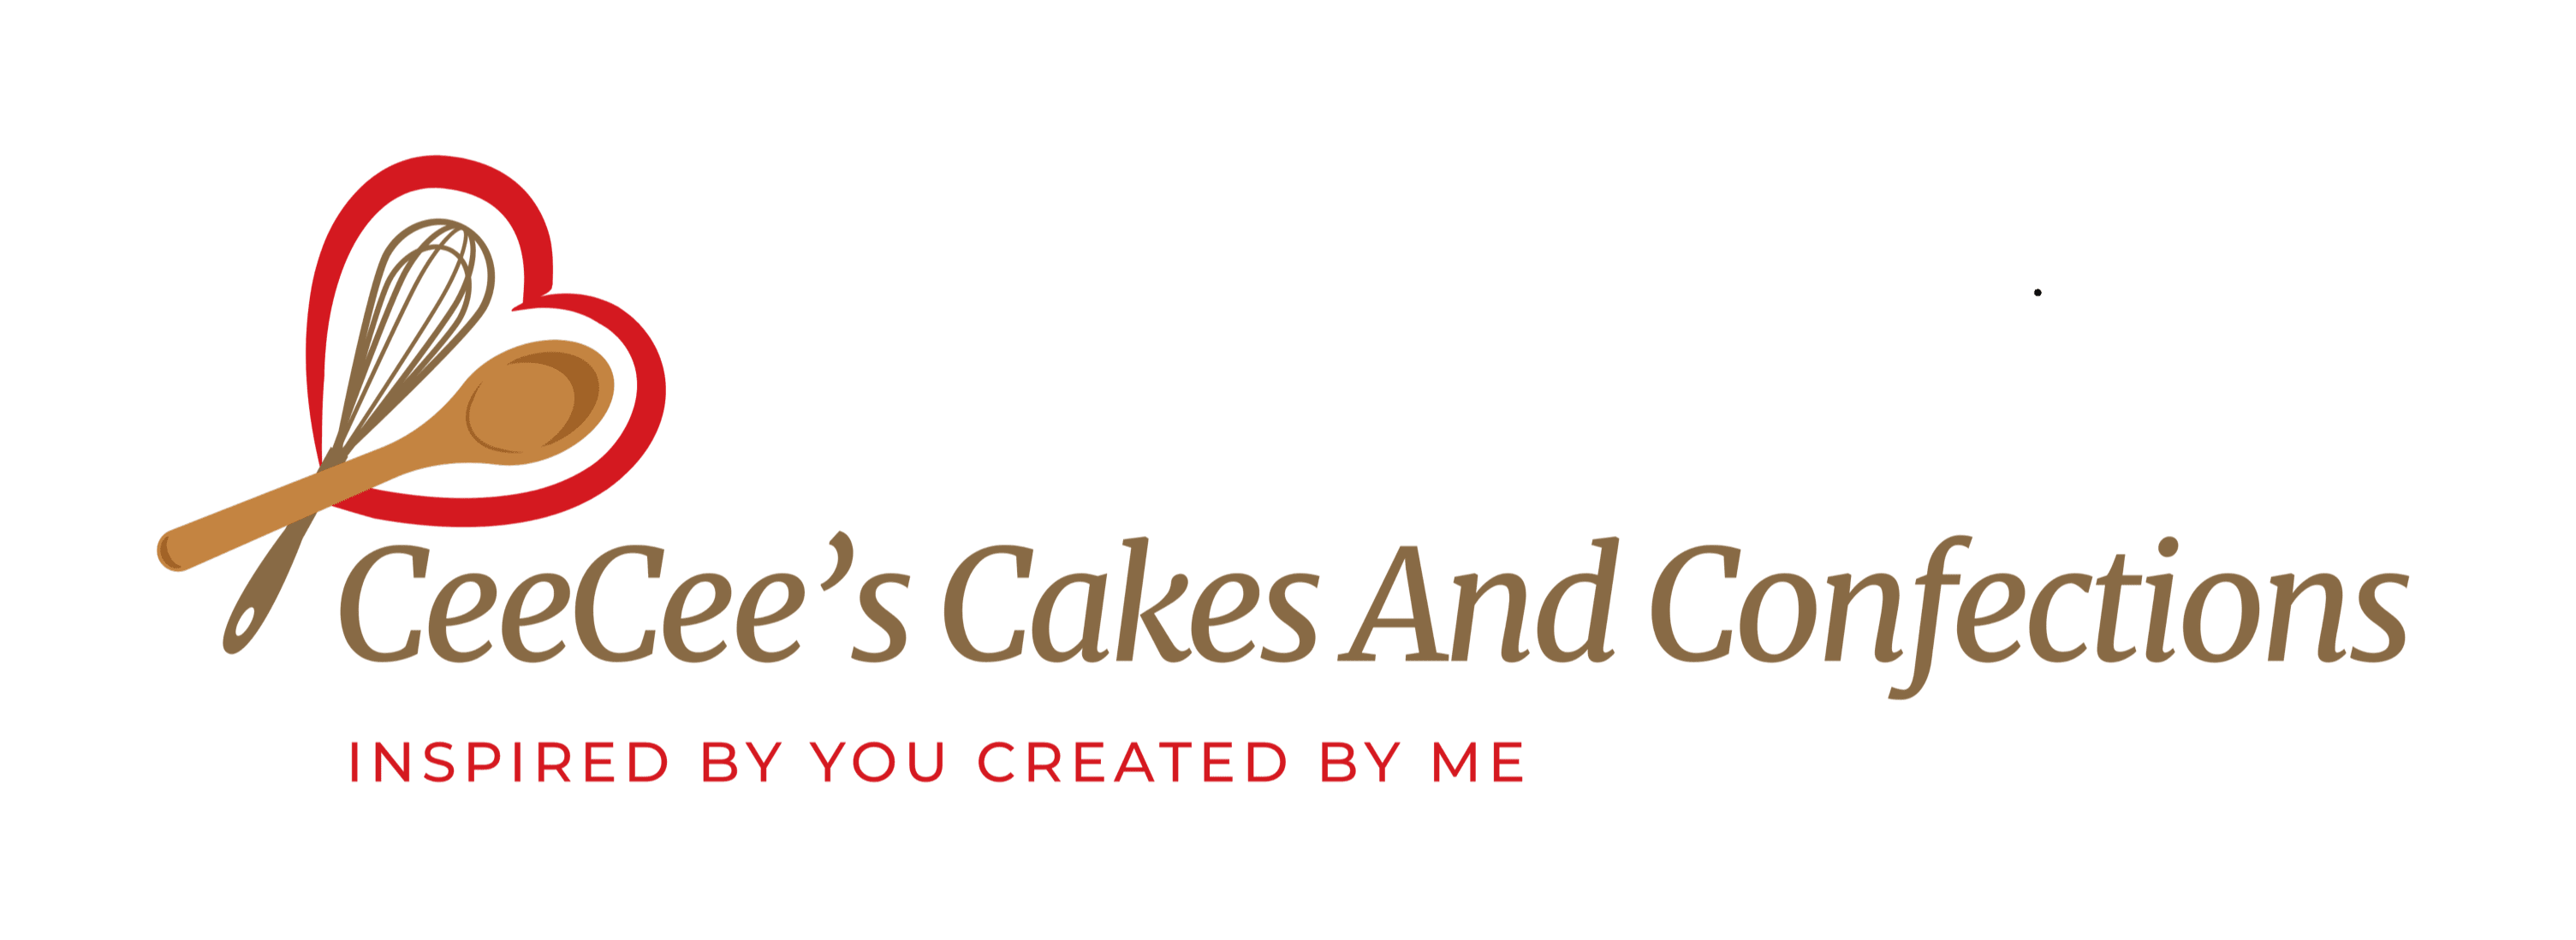 CeeCee’s Cakes and Confections